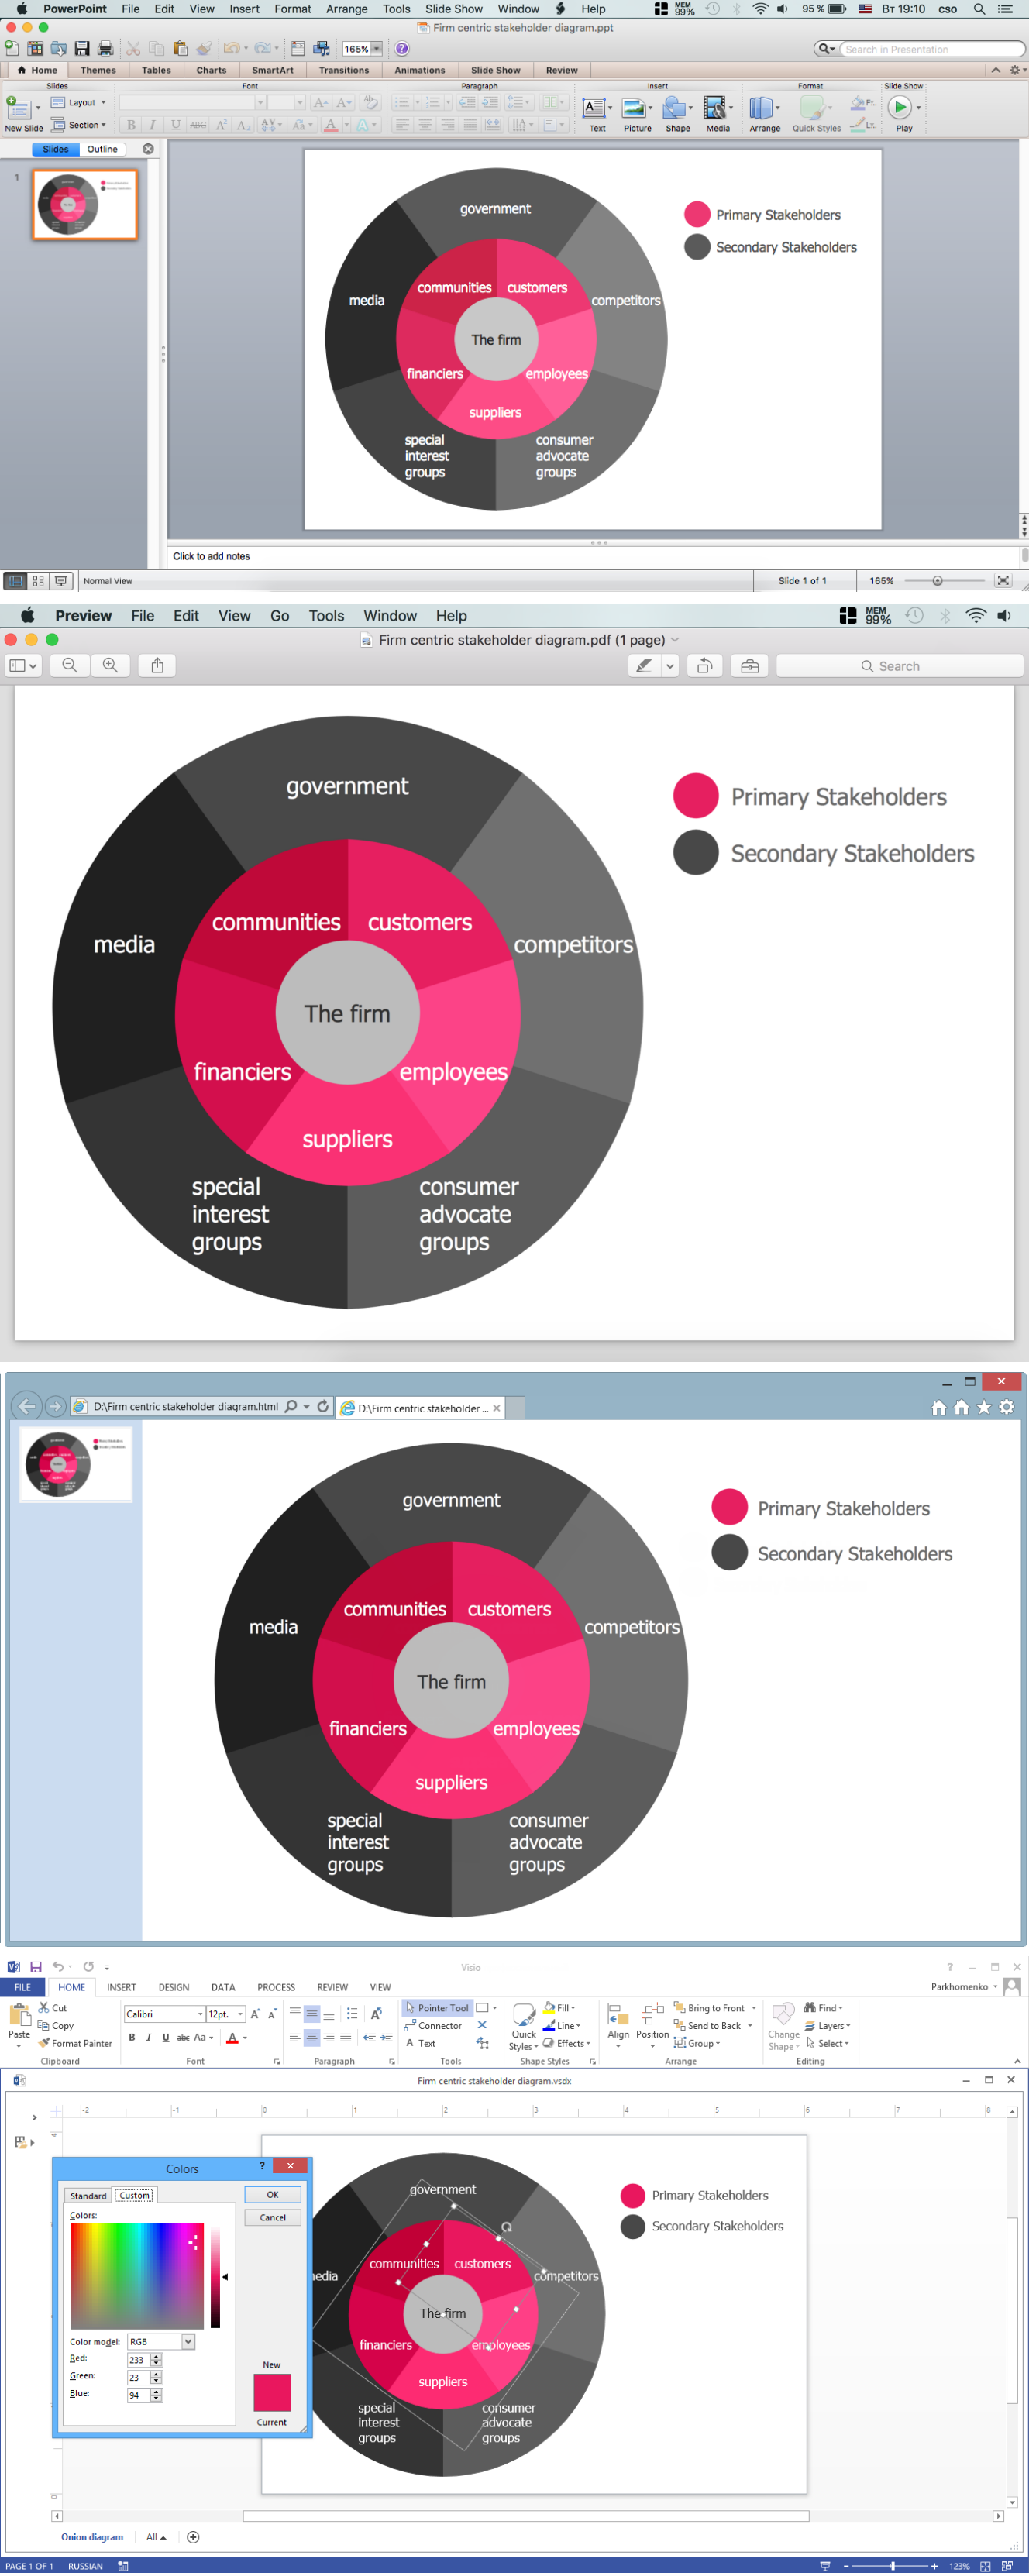 Firm Centric Stakeholder Diagram - Export to PPT, PDF, HTML, Visio